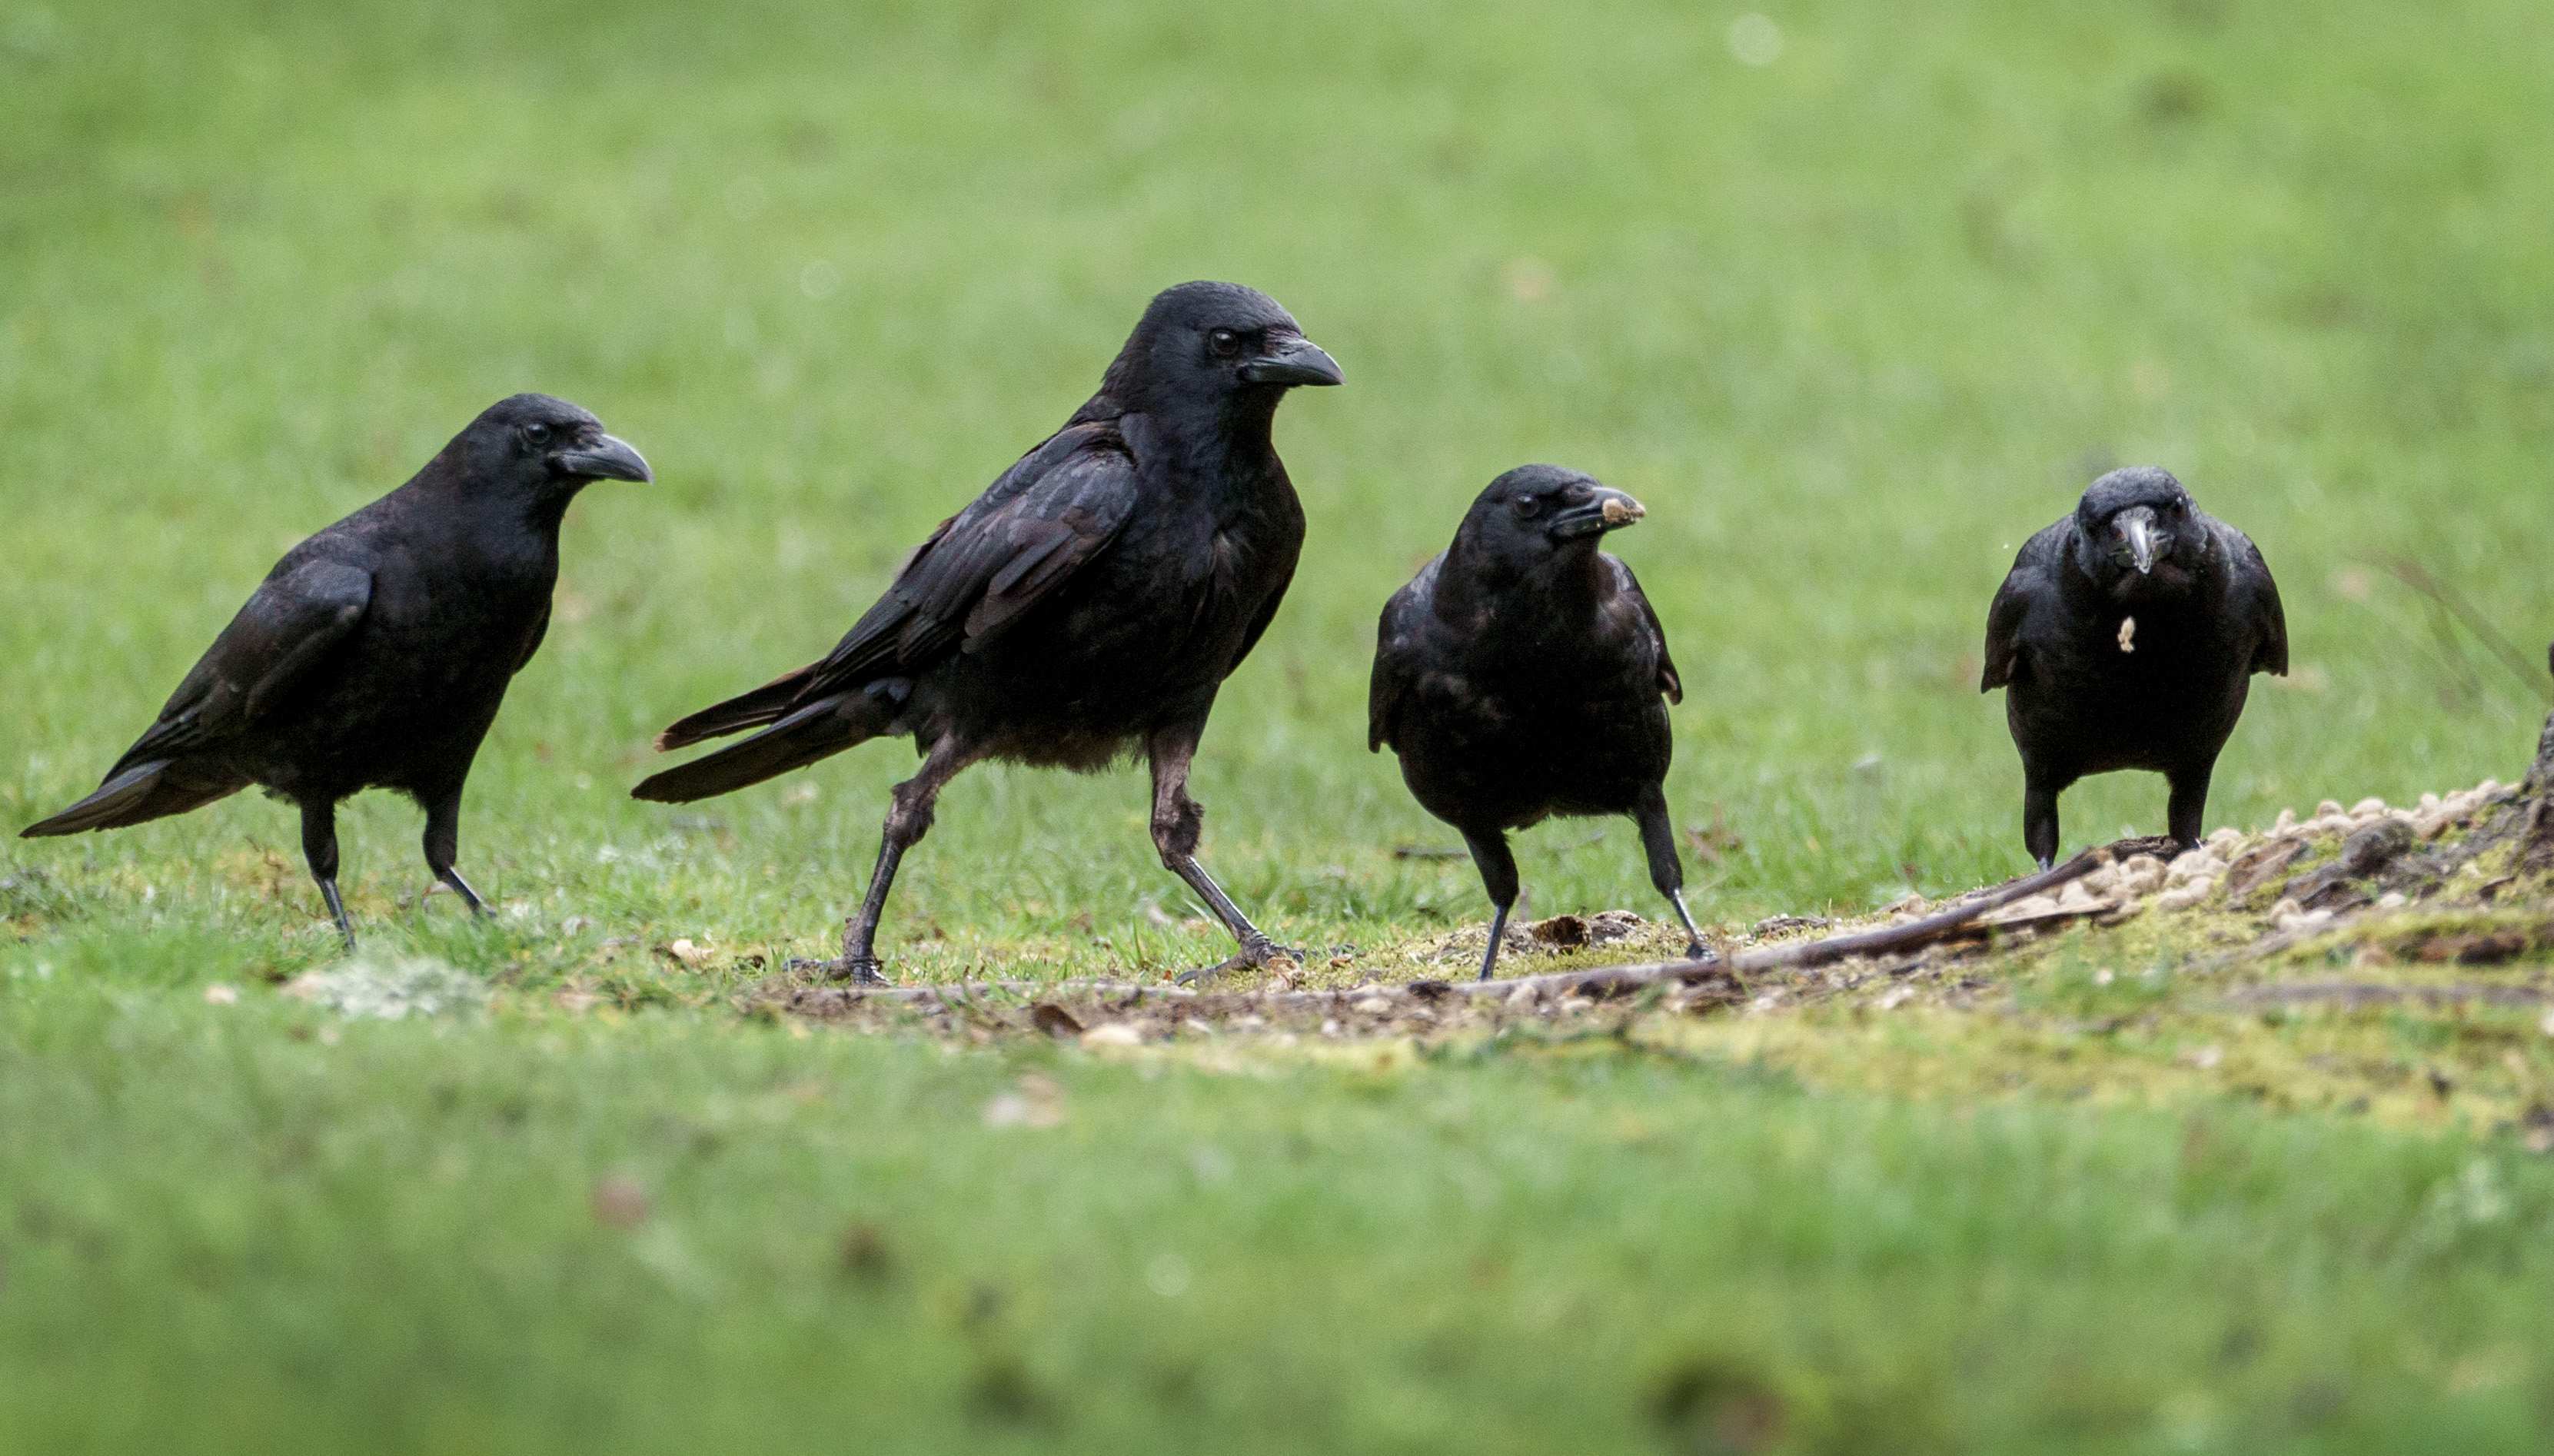 Four Crows on a grass field